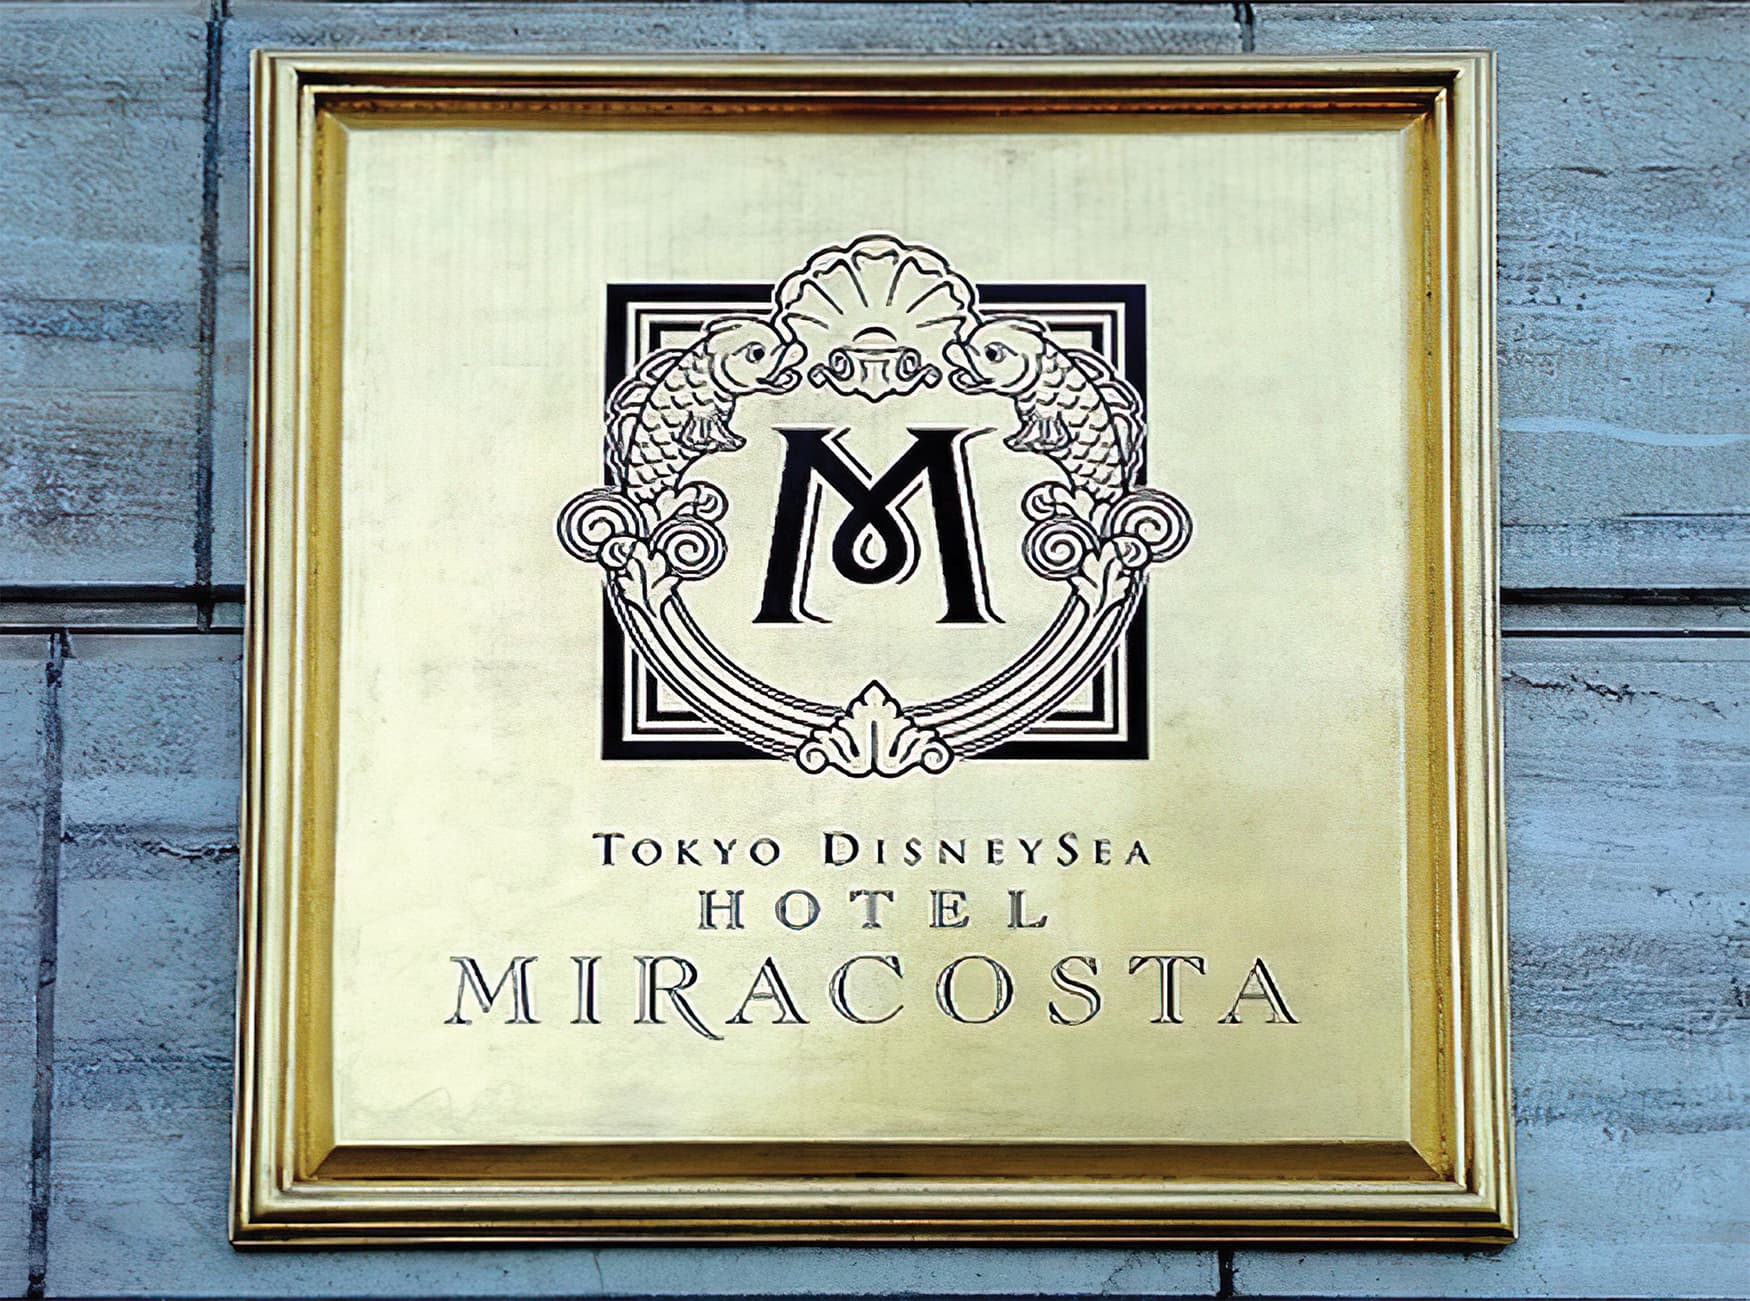 Disney Hotel Miracosta, located in Tokyo, Japan. Hospitality Design. RSM Design was commissioned to create the identity, logo, branding, and signage. Identity Plaque Design.